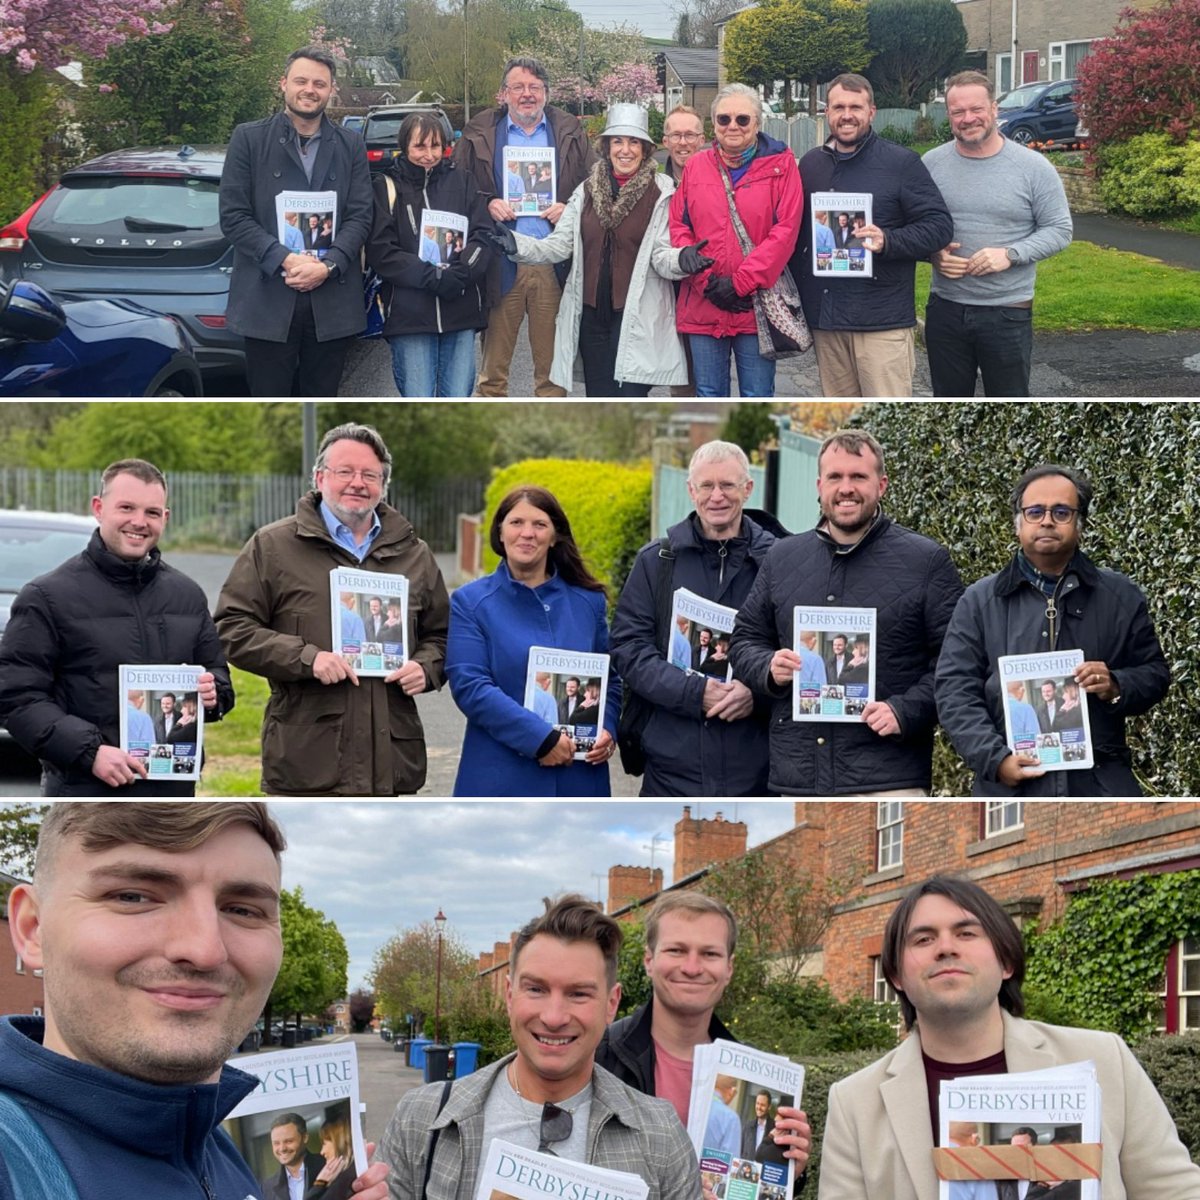 Top teams out all across the #EastMidlands today letting residents know about our big plans for #Derbyshire and #Nottinghamshire Thanks guys 🙏